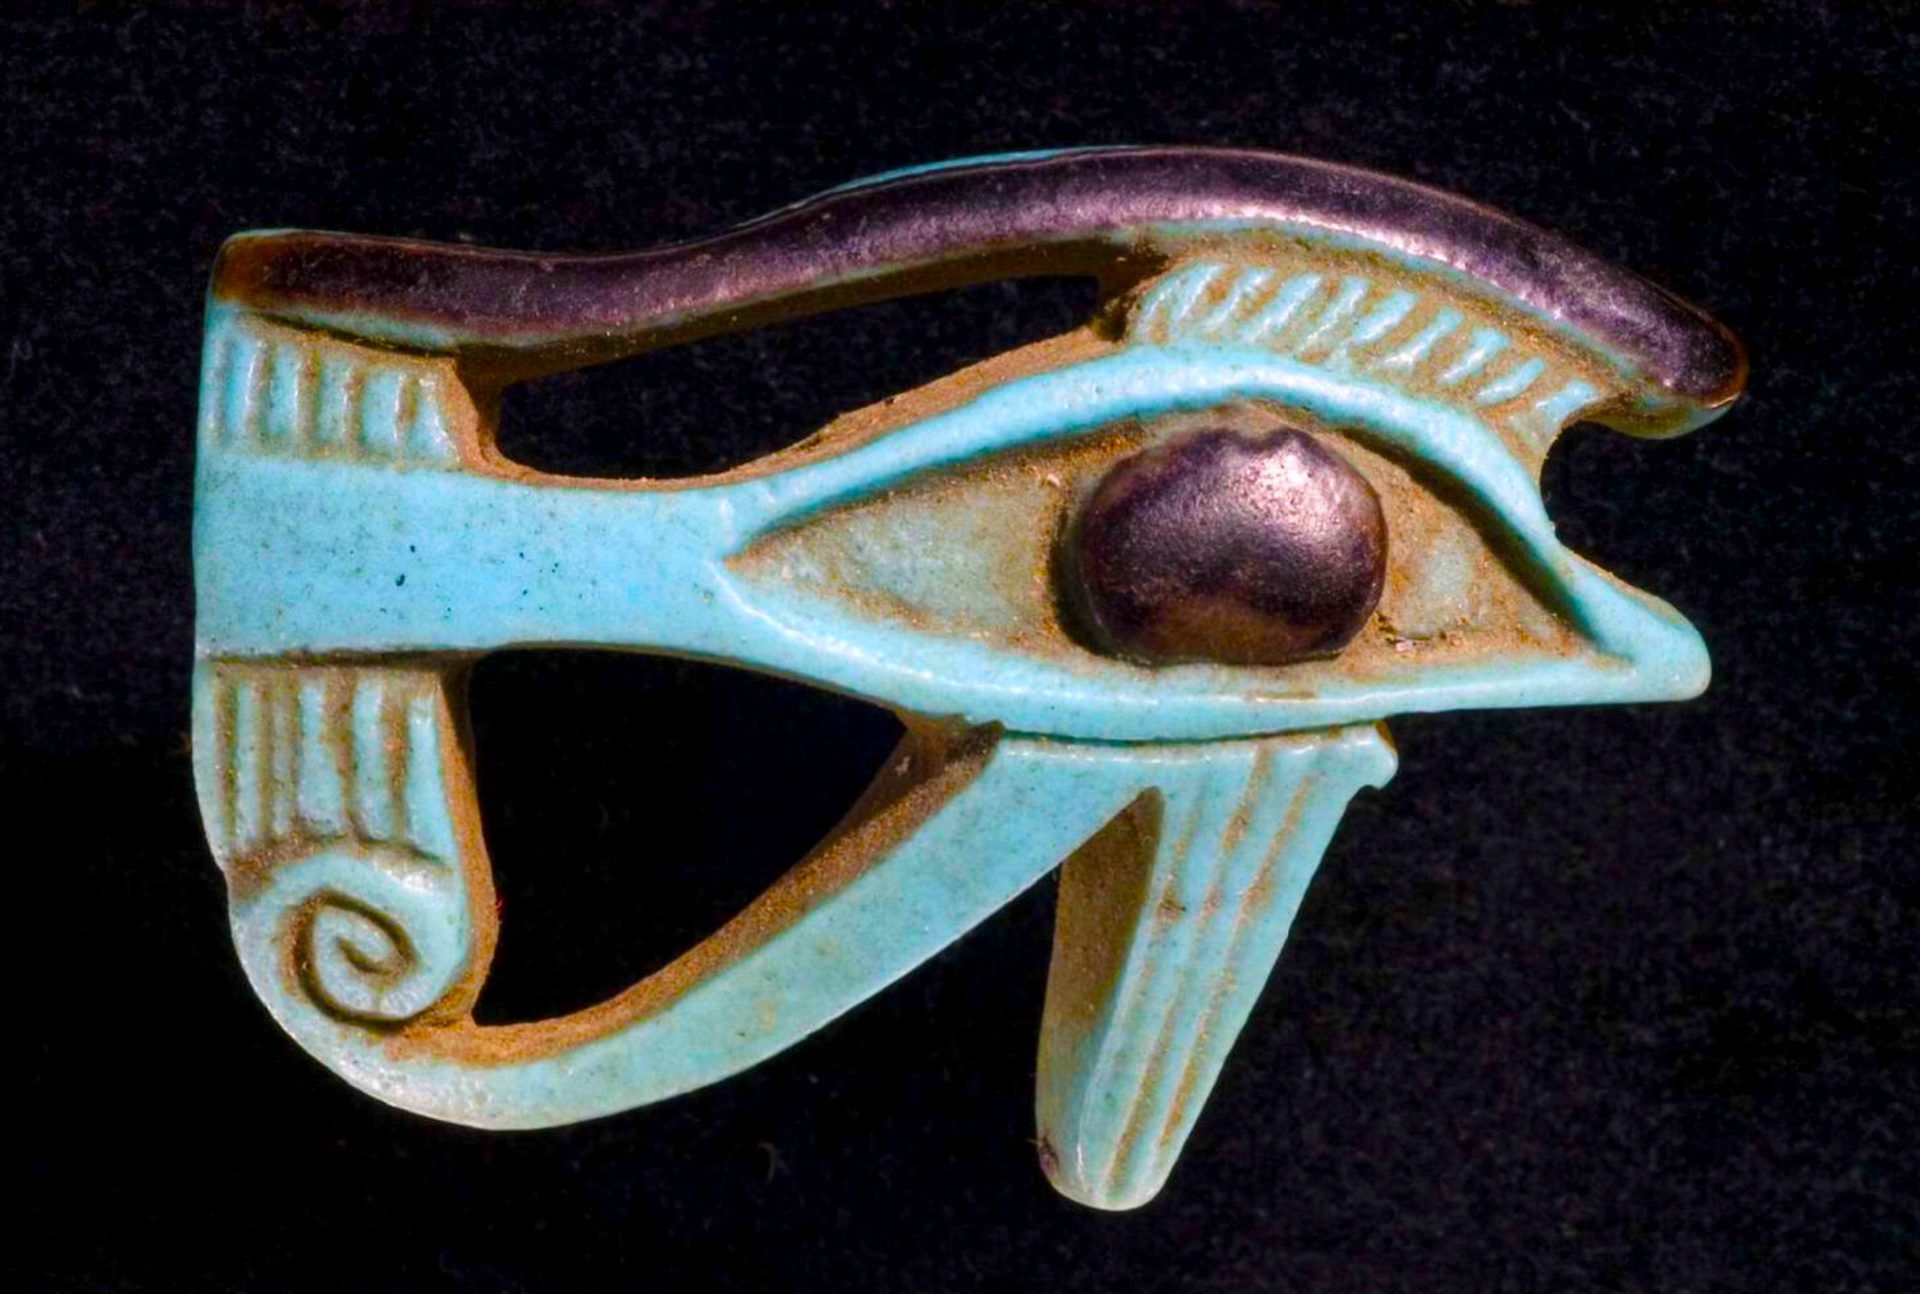 An ancient Egyptian Eye of Horus amulet made of turquoise faience with a brown pupil and a purple eyebrow on a black background.